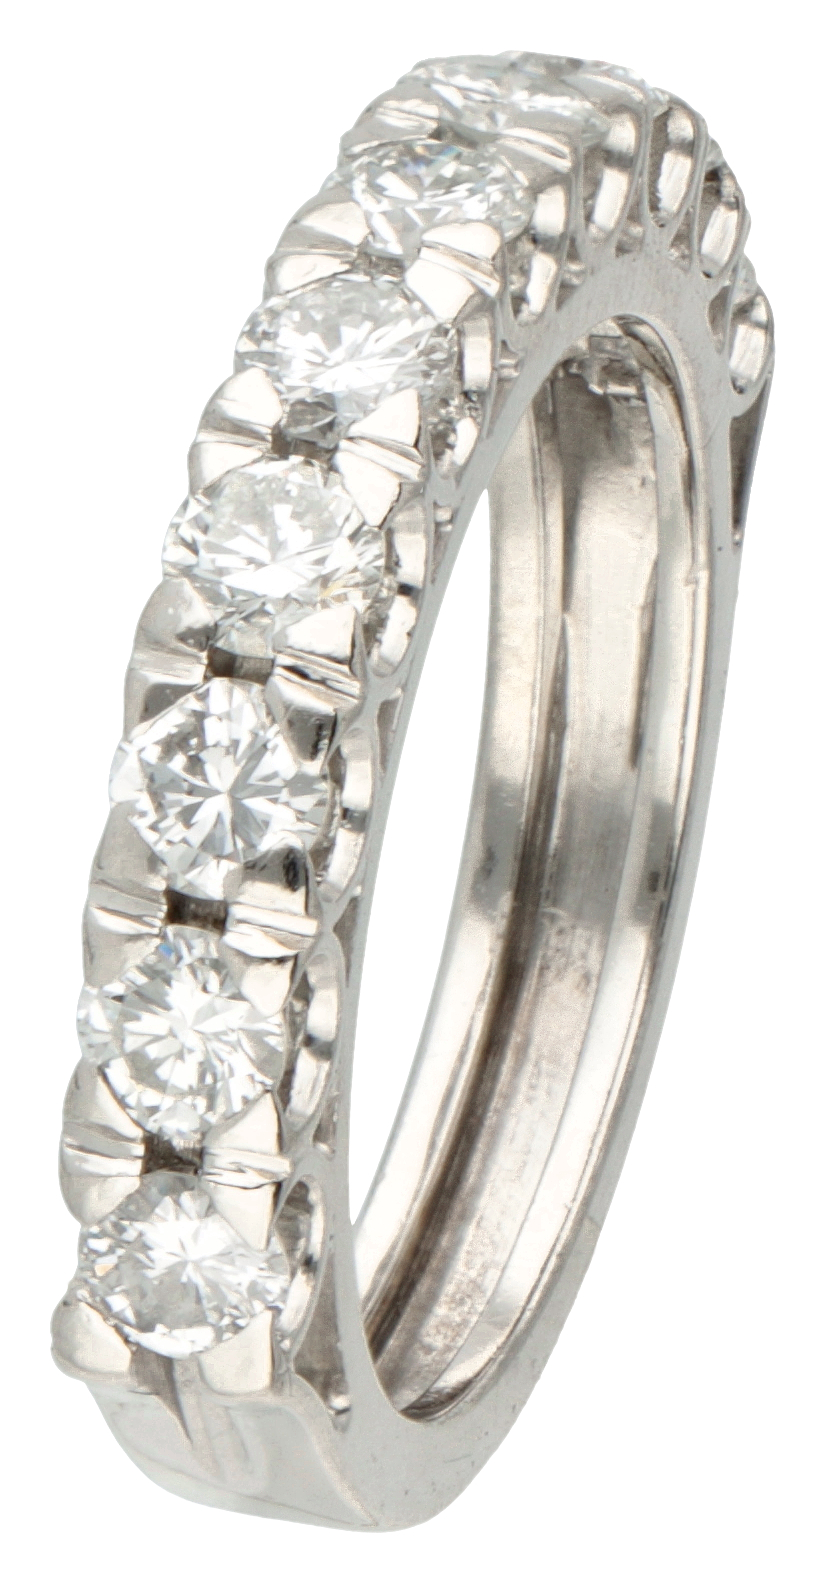 18K. White gold demi-alliance ring set with approx. 1.00 ct. diamond.